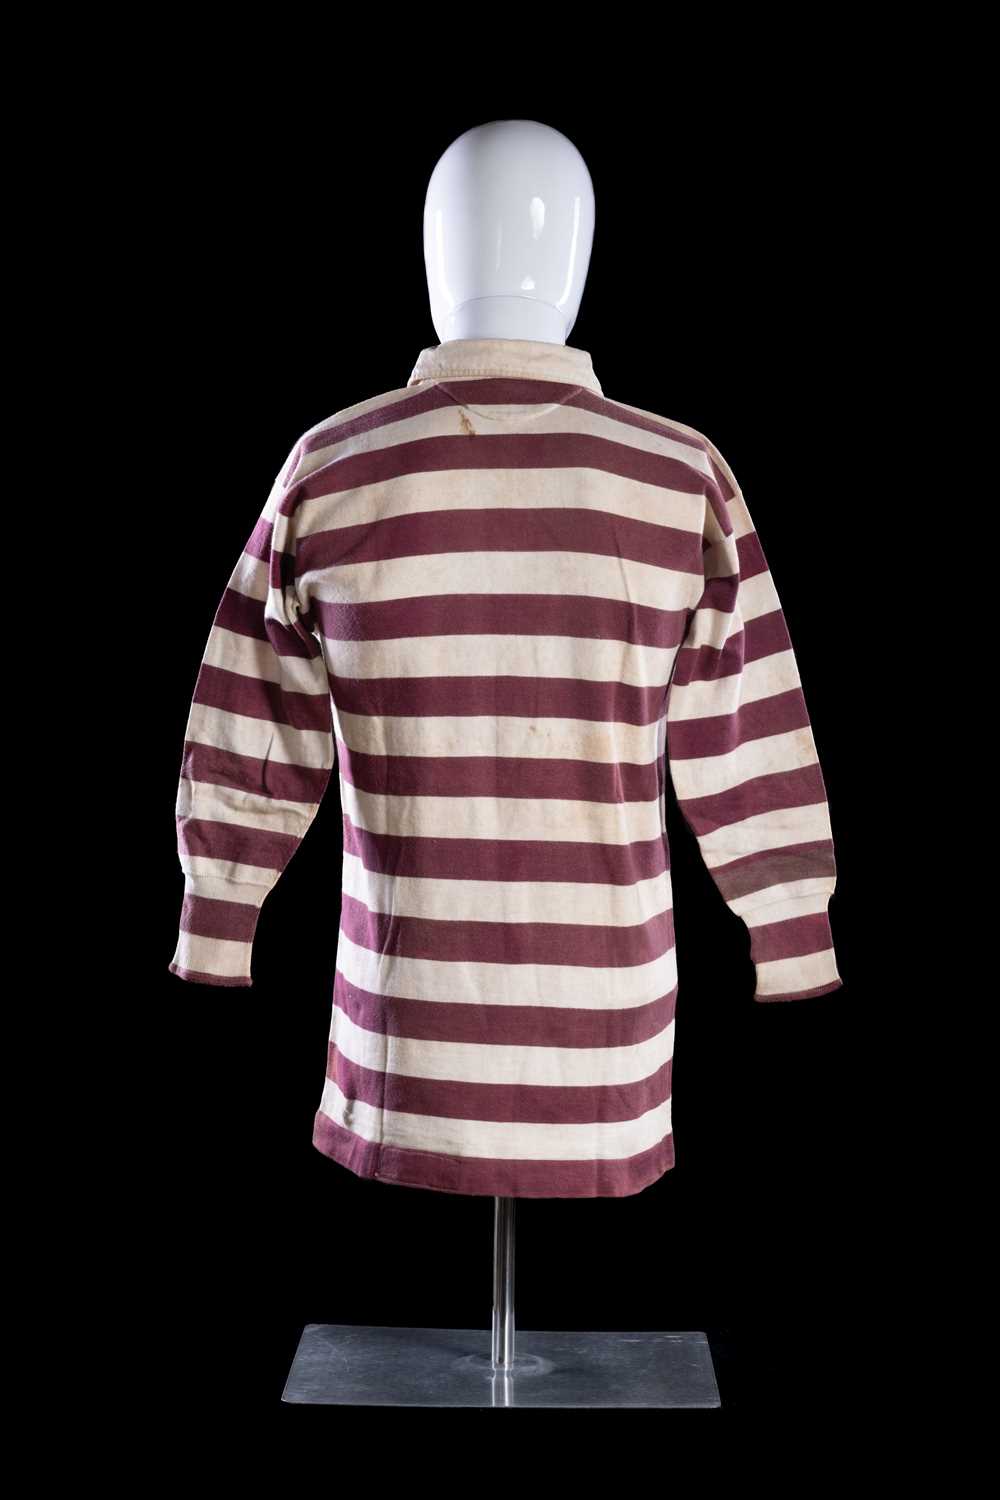 A CIRCA 1902 WALES RUGBY UNION TRIAL JERSEY MATCH-WORN BY CHARLES MEYRICK PRITCHARD (1882-1916) - Image 2 of 4